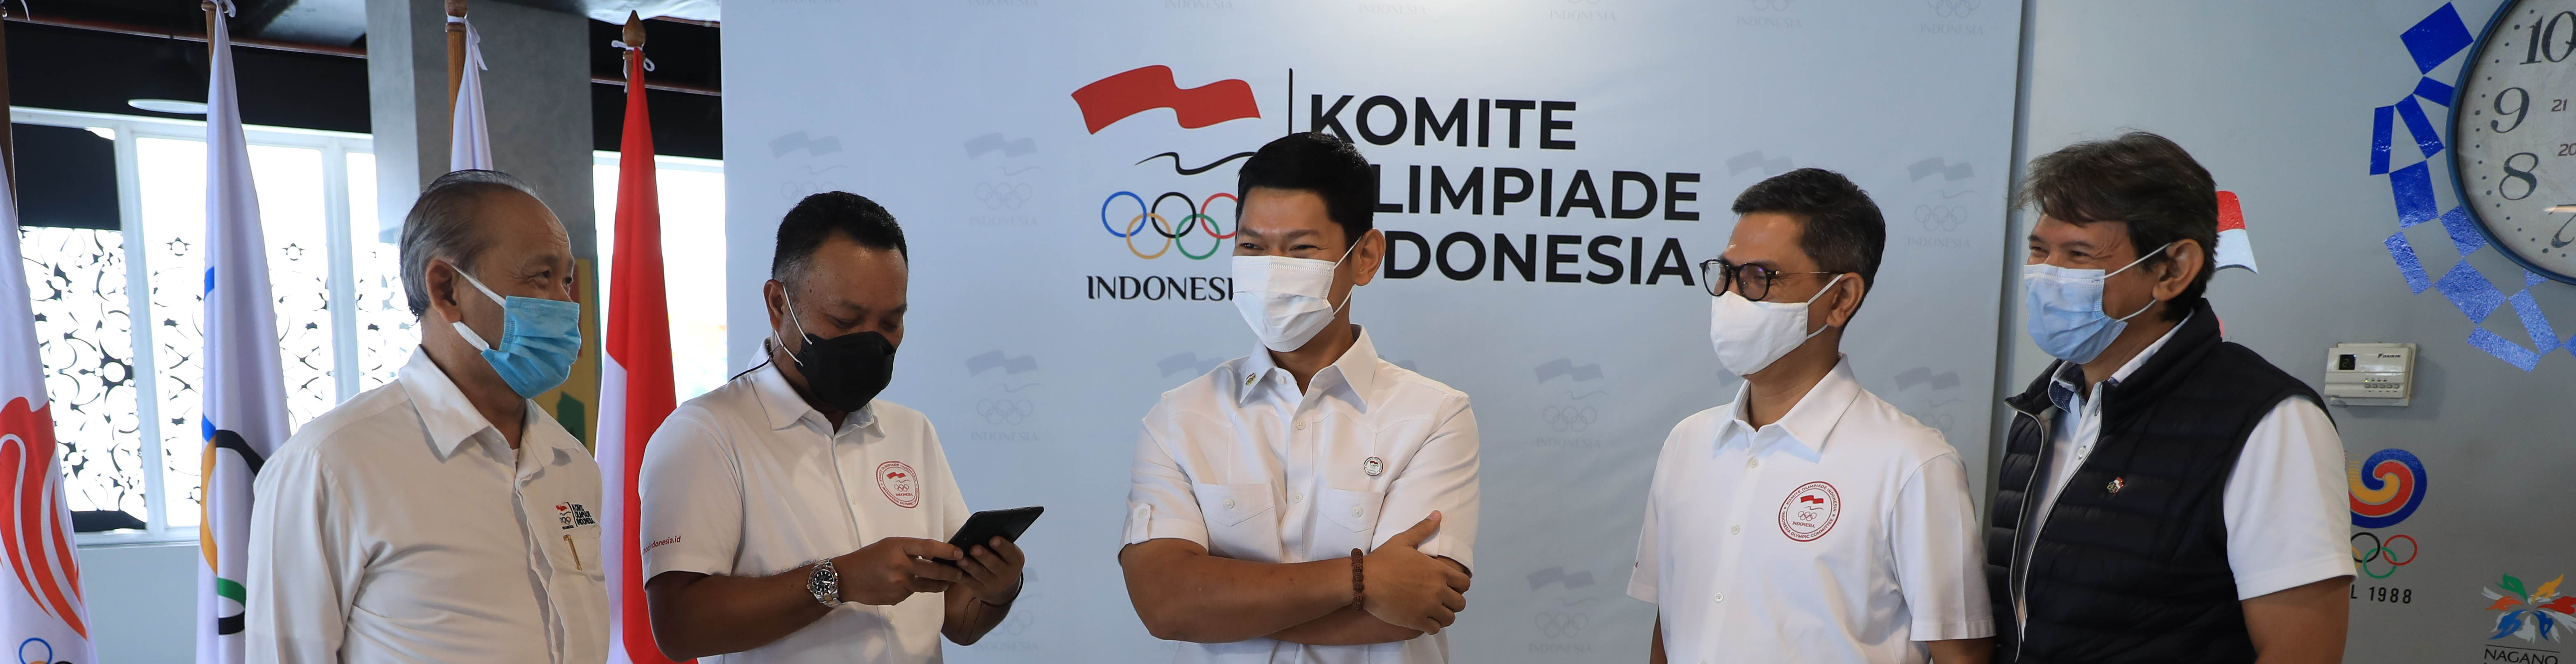 Indonesia Olympic Commitee - President Gives 2032 Olympics' Bidding a Go